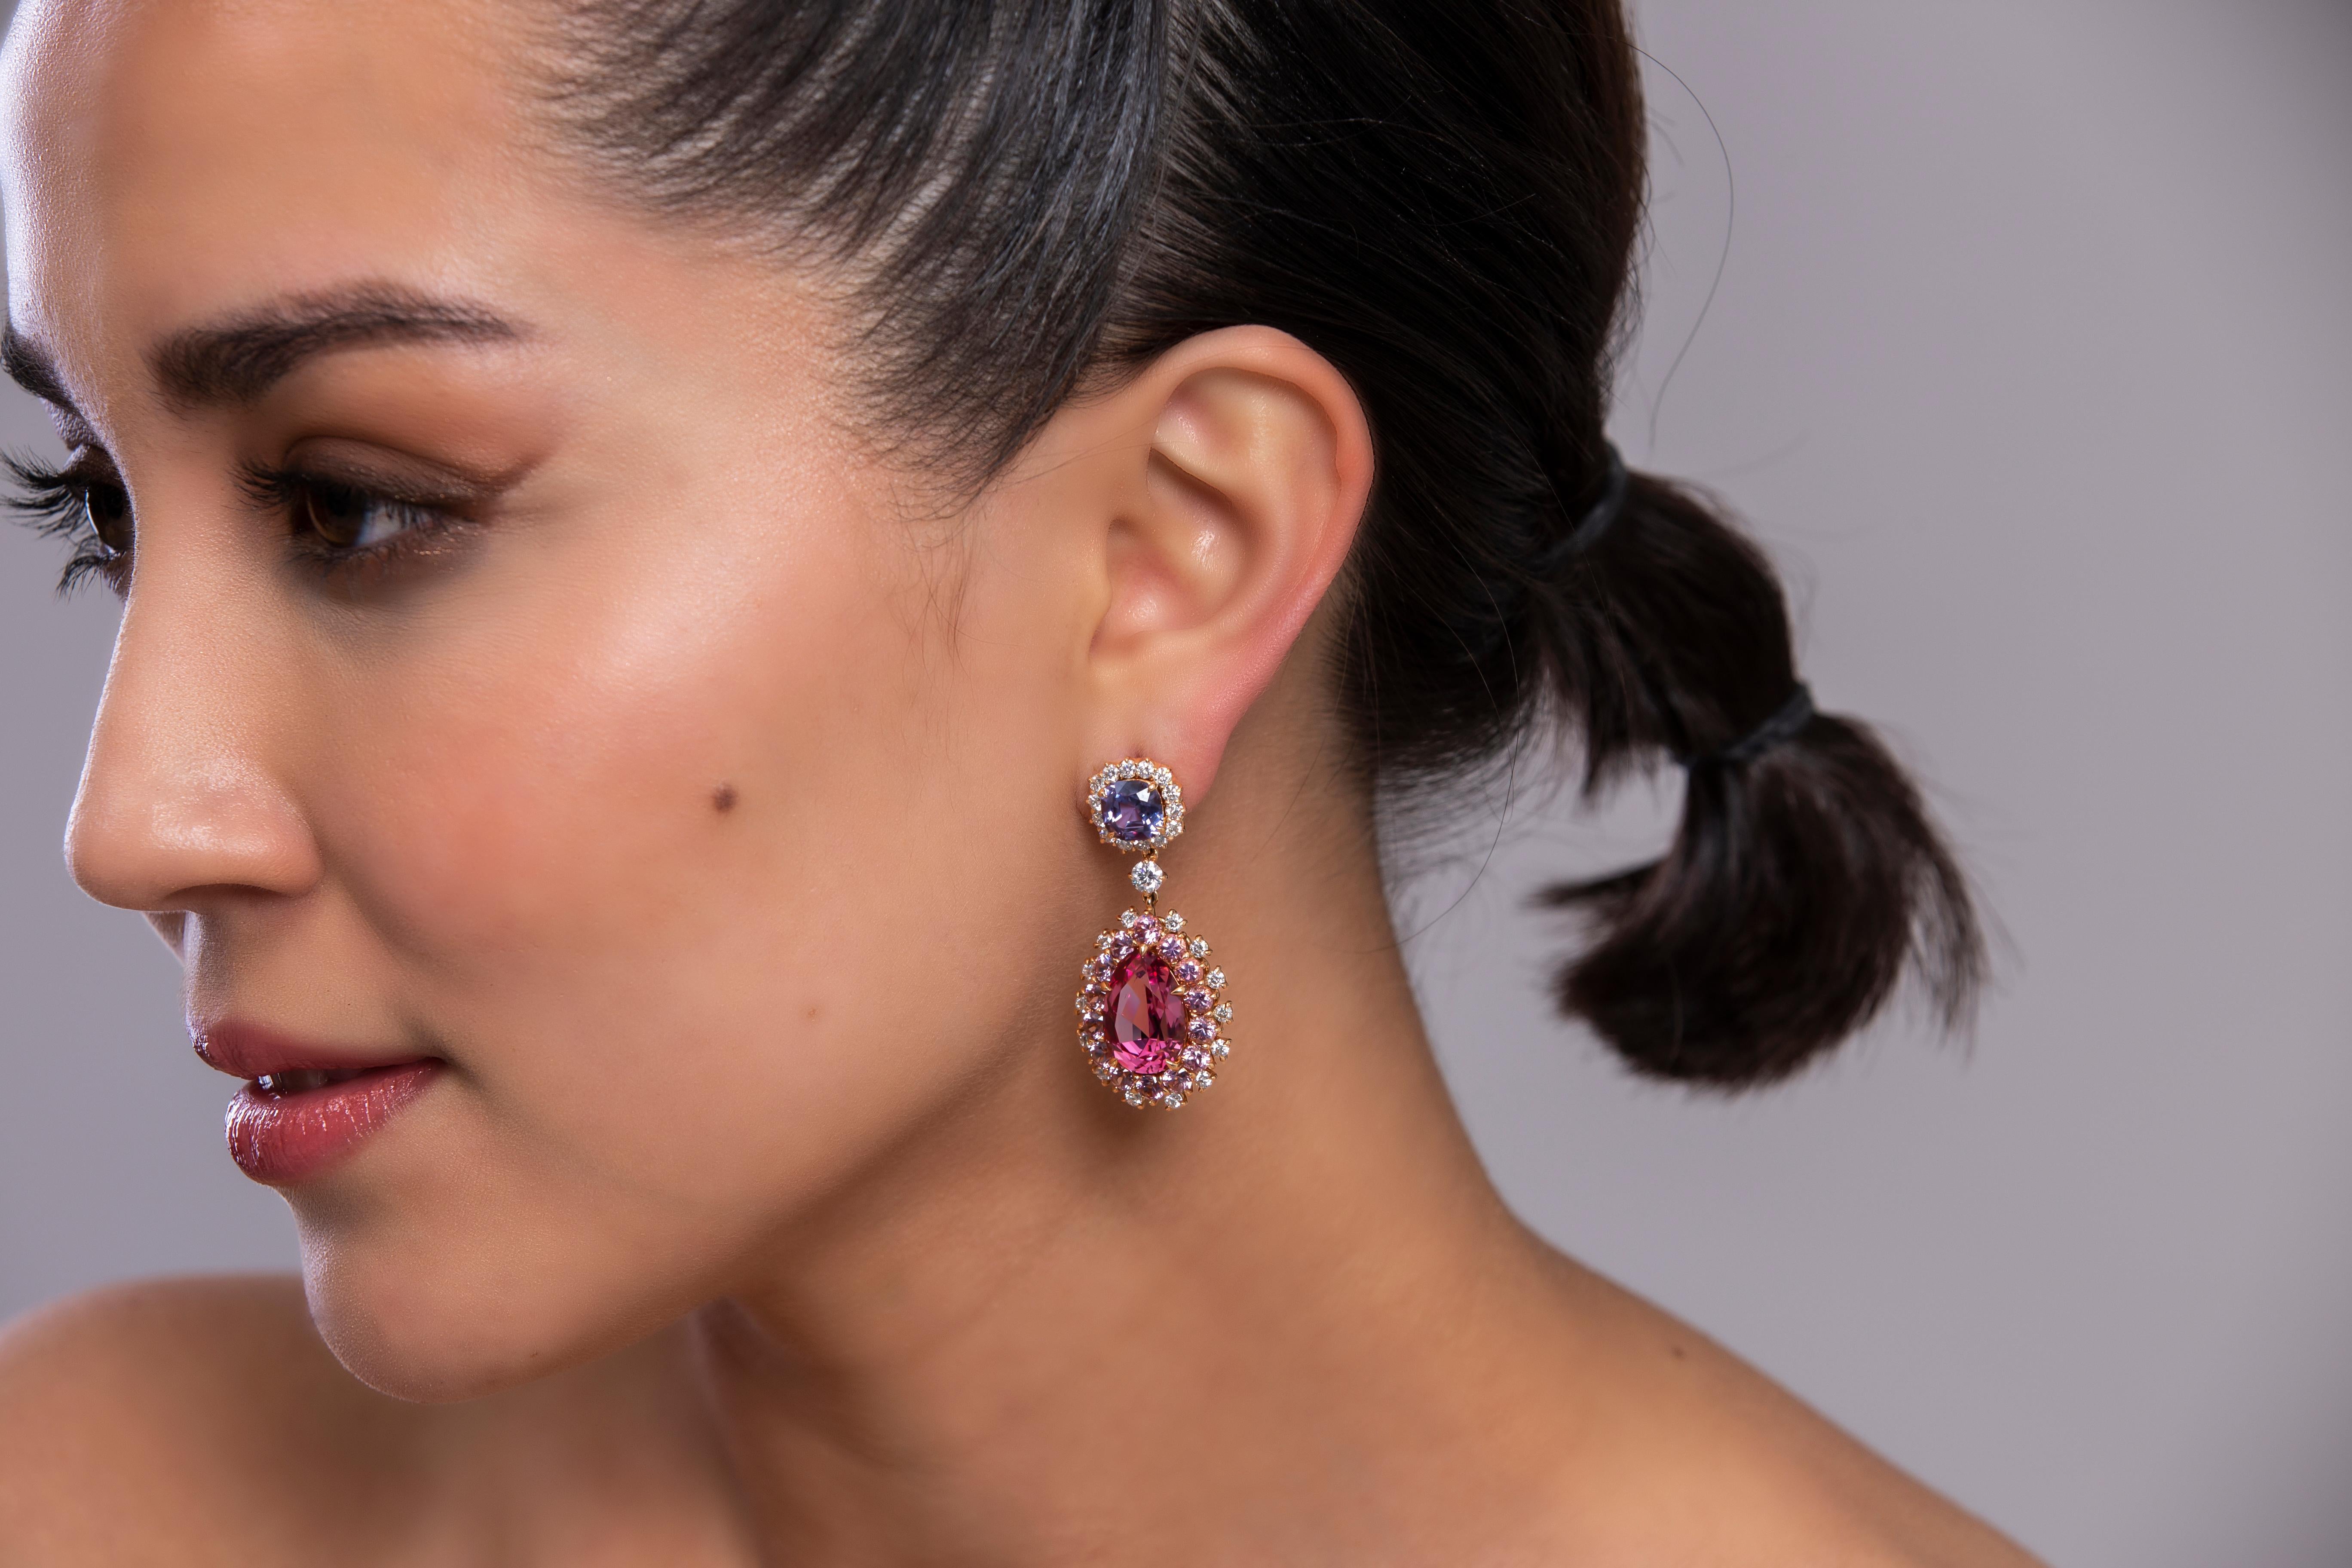 •	Earrings in 18K yellow gold with 2 egg shaped Pink Spinels- total carat weight 16.56 and 2 cushion cut purple spinels total carat weight 4.36 ct. 
•	18k yellow gold with purple and pink spinels, diamond earrings.
•	1.69’ long each.
•	Spinels Pink